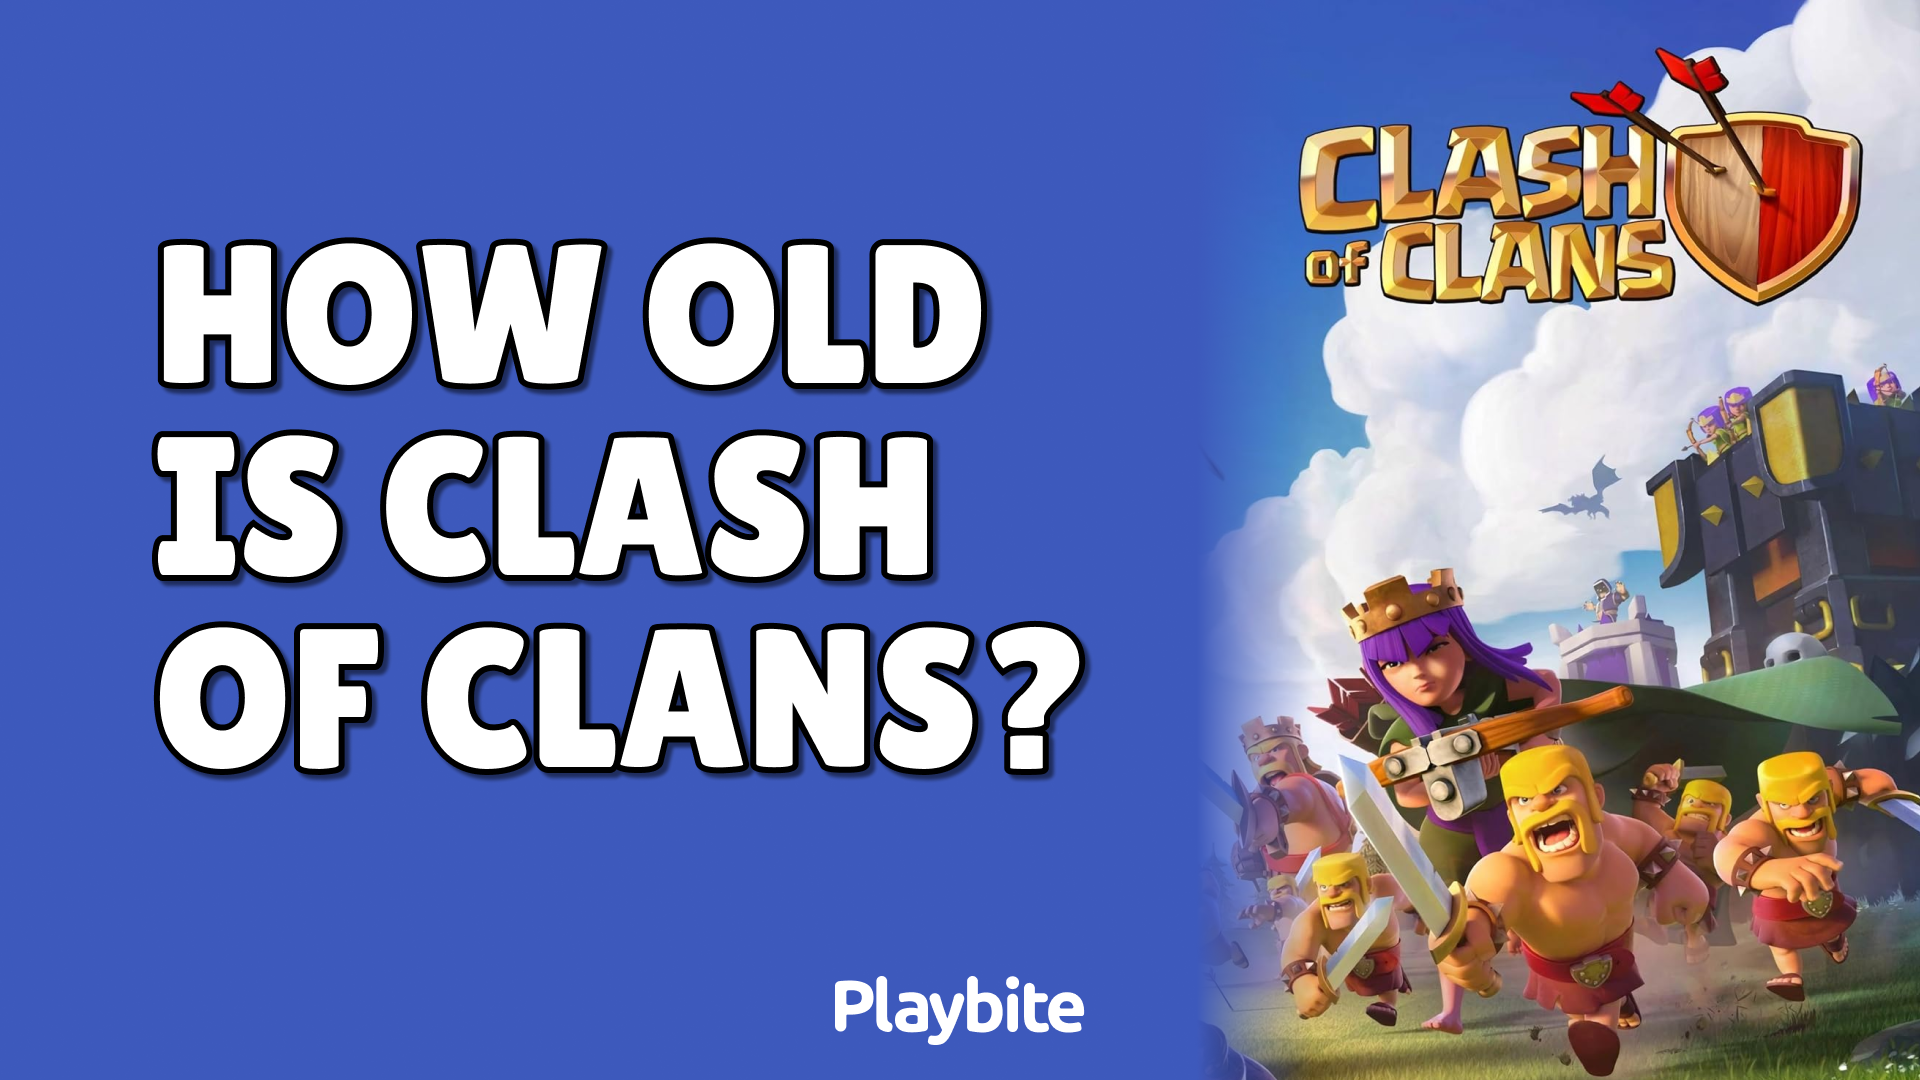 How Old Is Clash Of Clans?